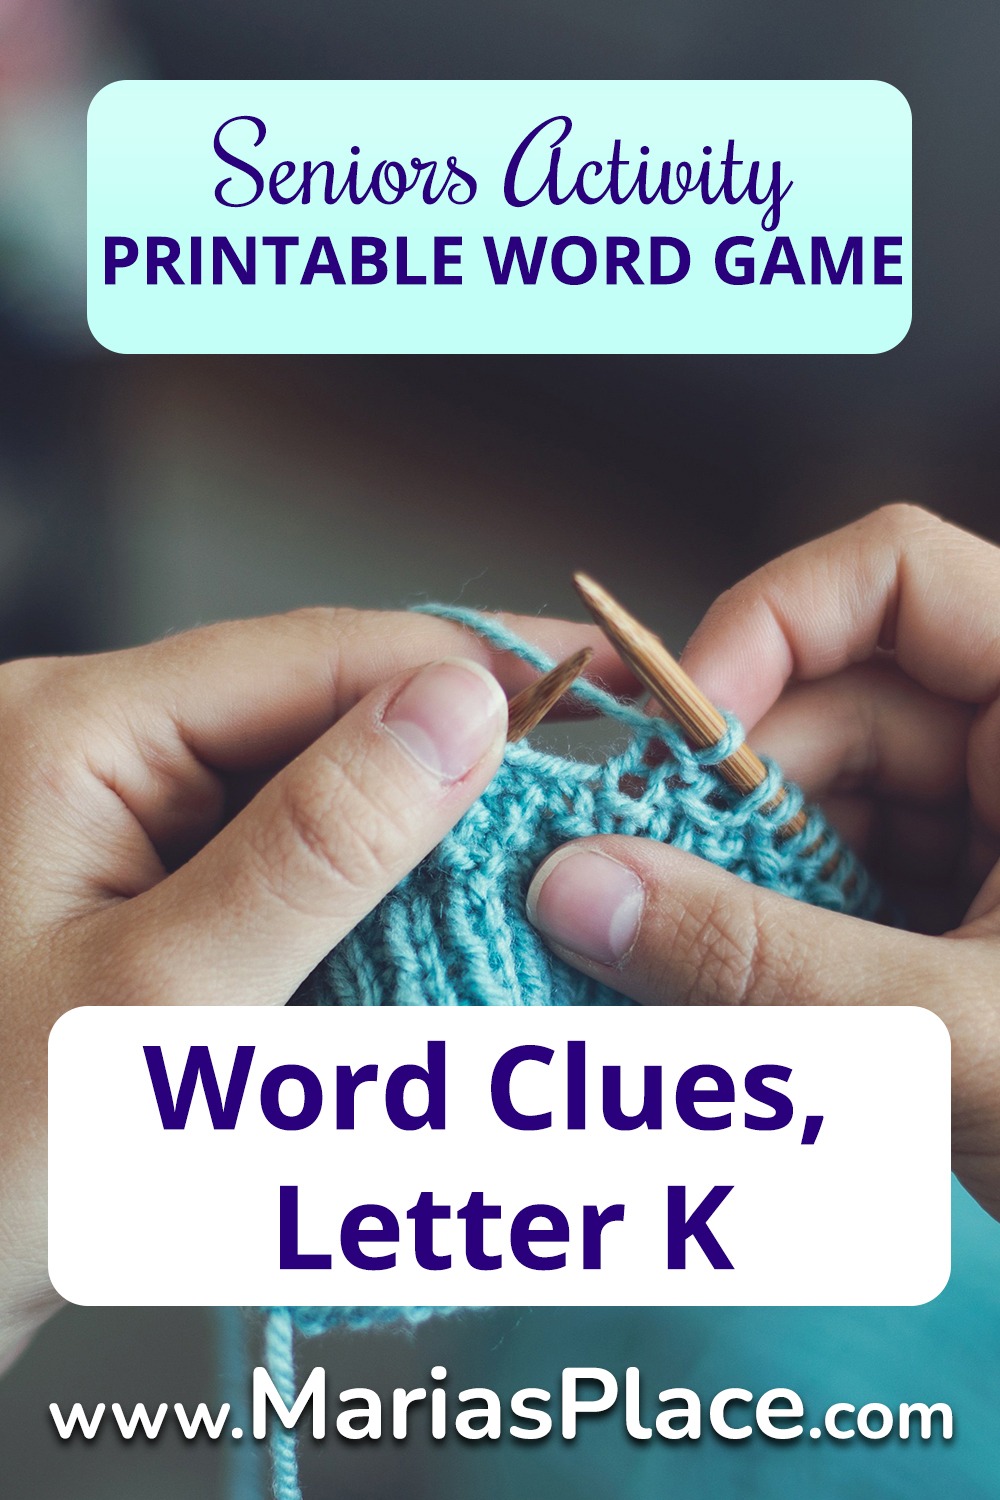 The Answer to Every Clue Starts with the Letter K